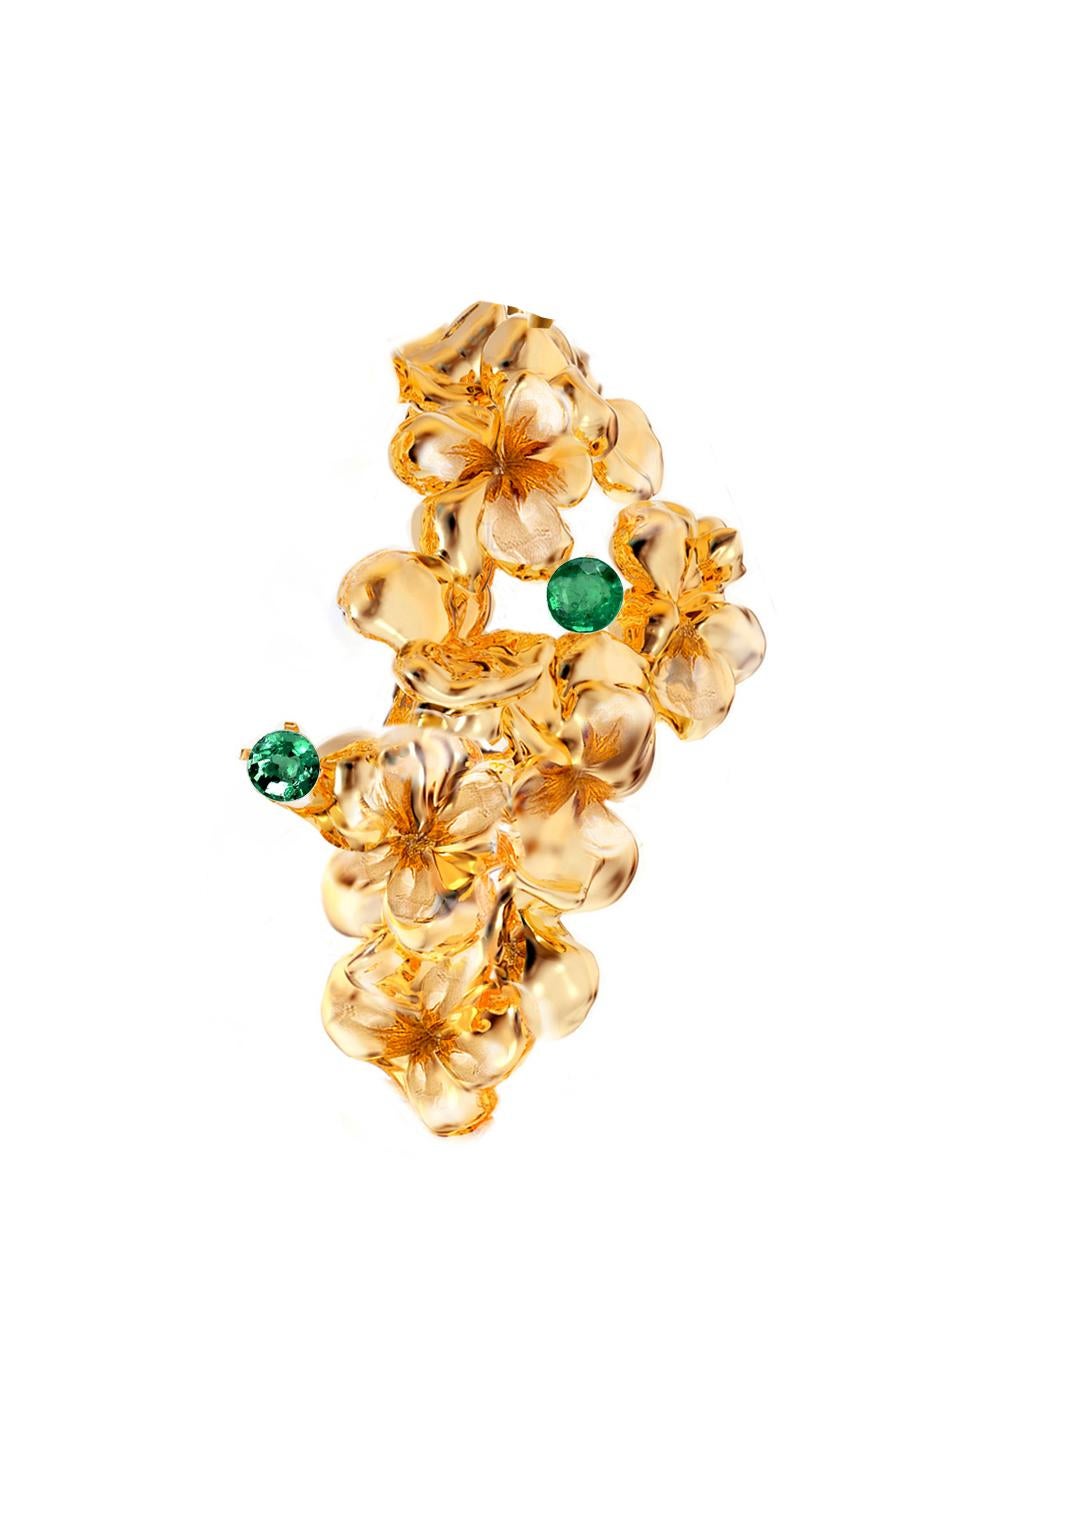 This contemporary Hortensia clip-on earrings are in 18 karat yellow gold with round natural emeralds. The abstract sculptural design adds the extra highlights to the surface of the gold. The gems add the delicate blinks of colour. This jewellery